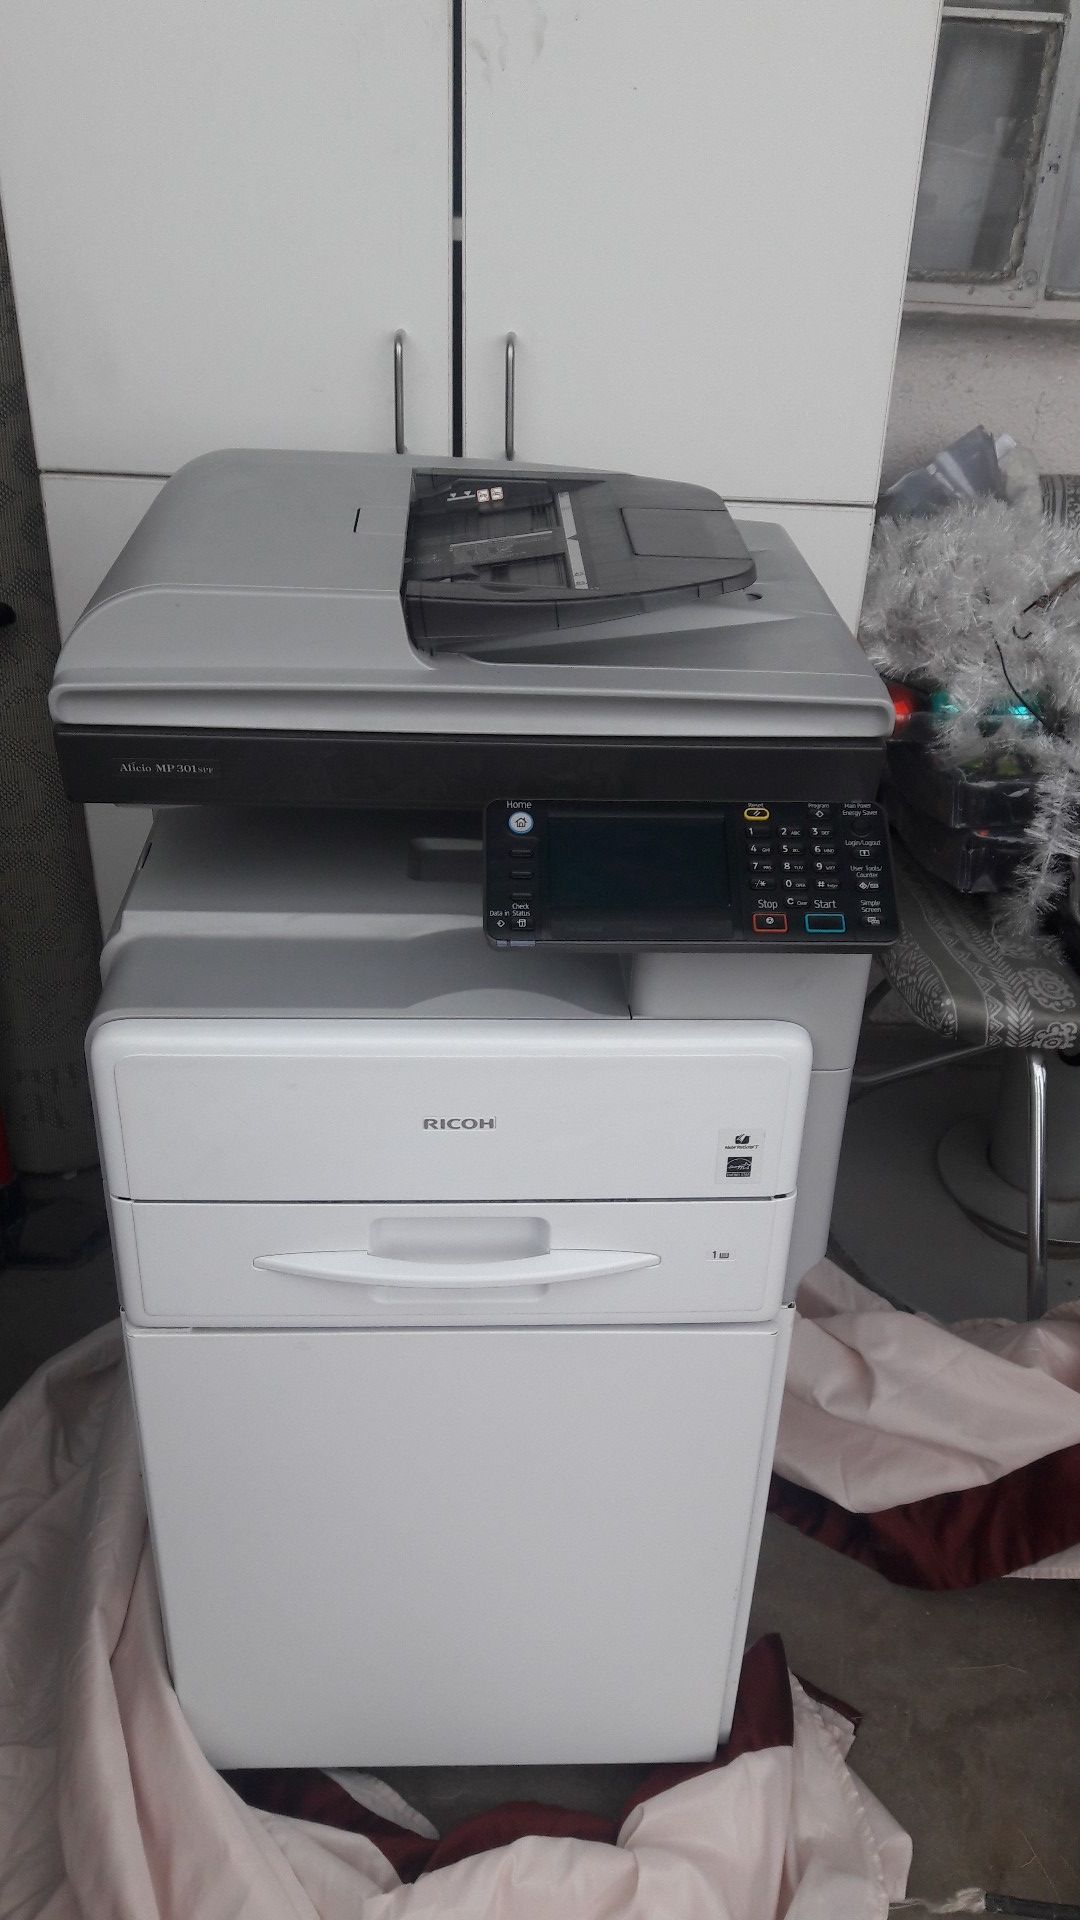 Ricoh Alicia l.p. 301spf consider new was in storage also has an I'm on next gen pcs power conditioning system